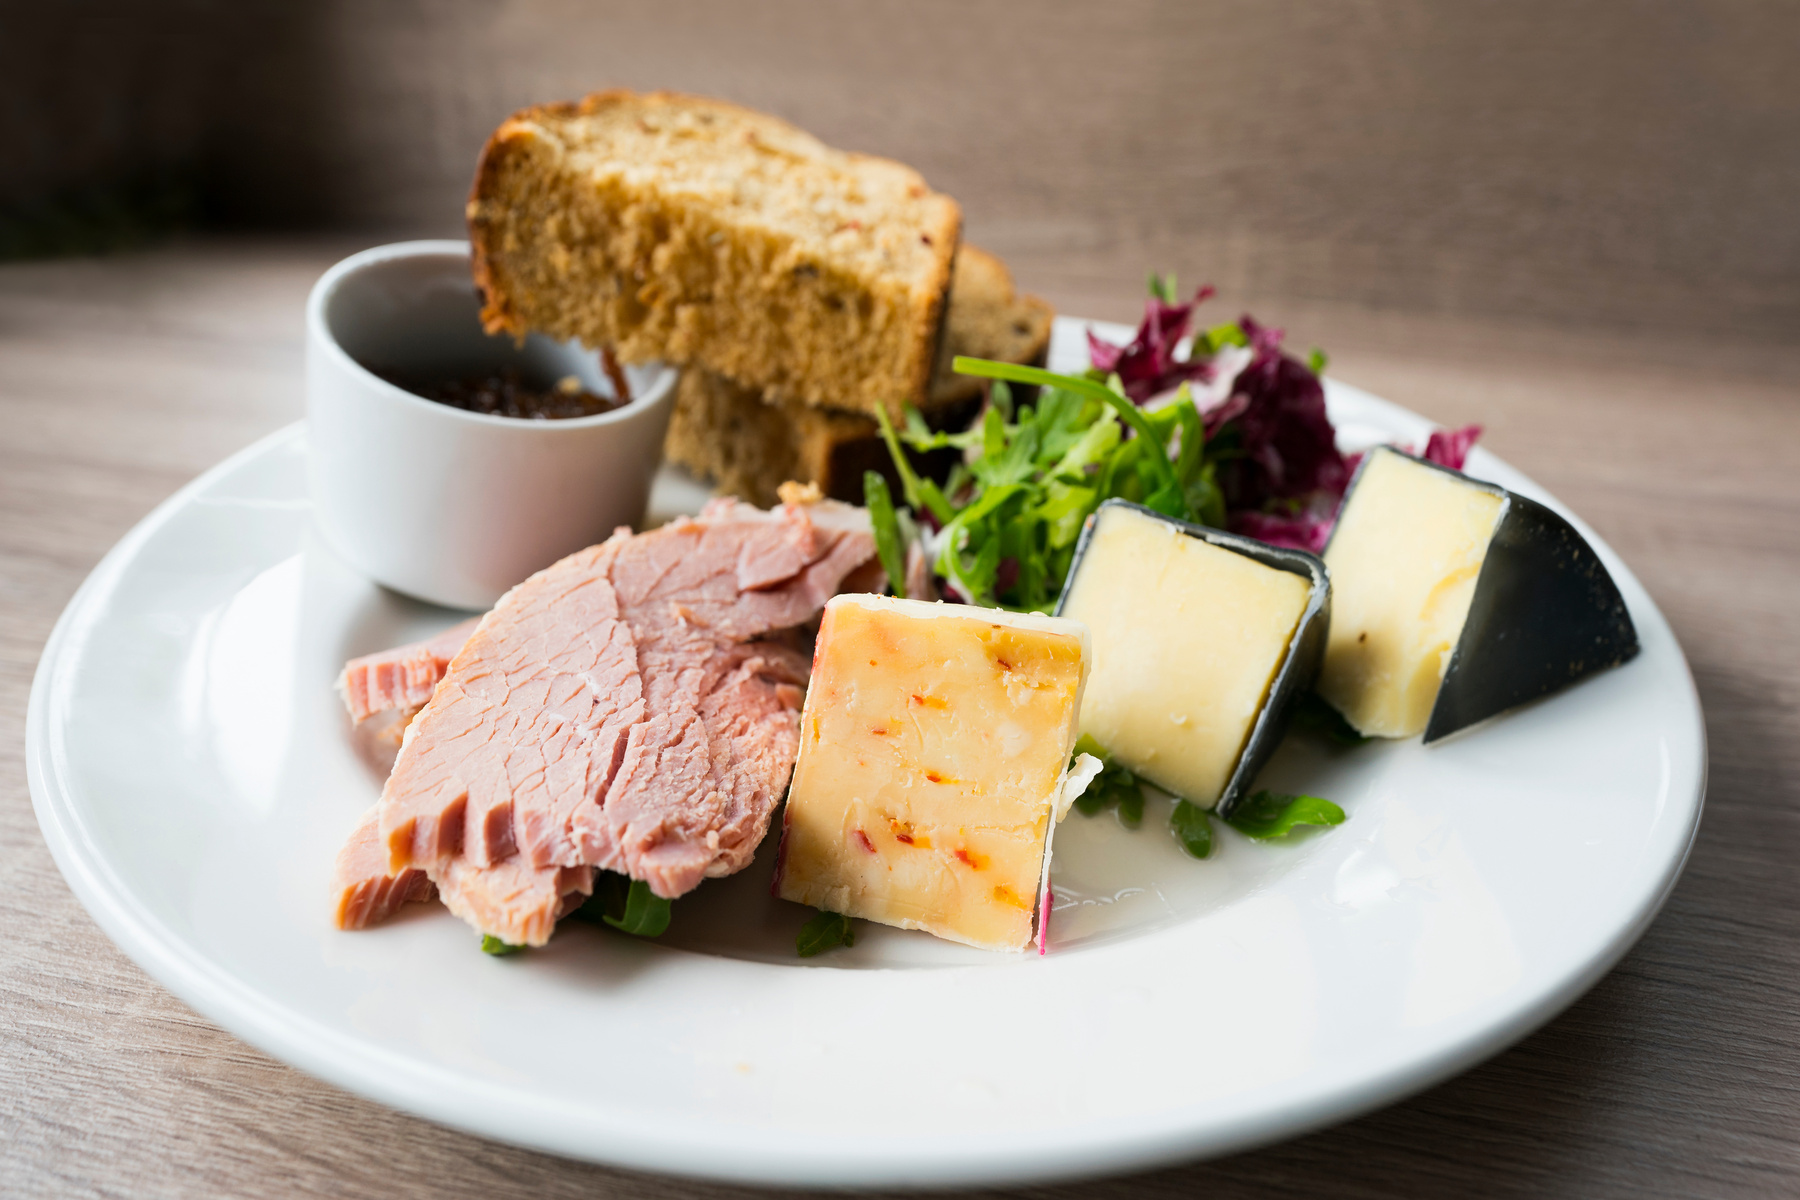 Ploughman's lunch of meat, bread and cheese